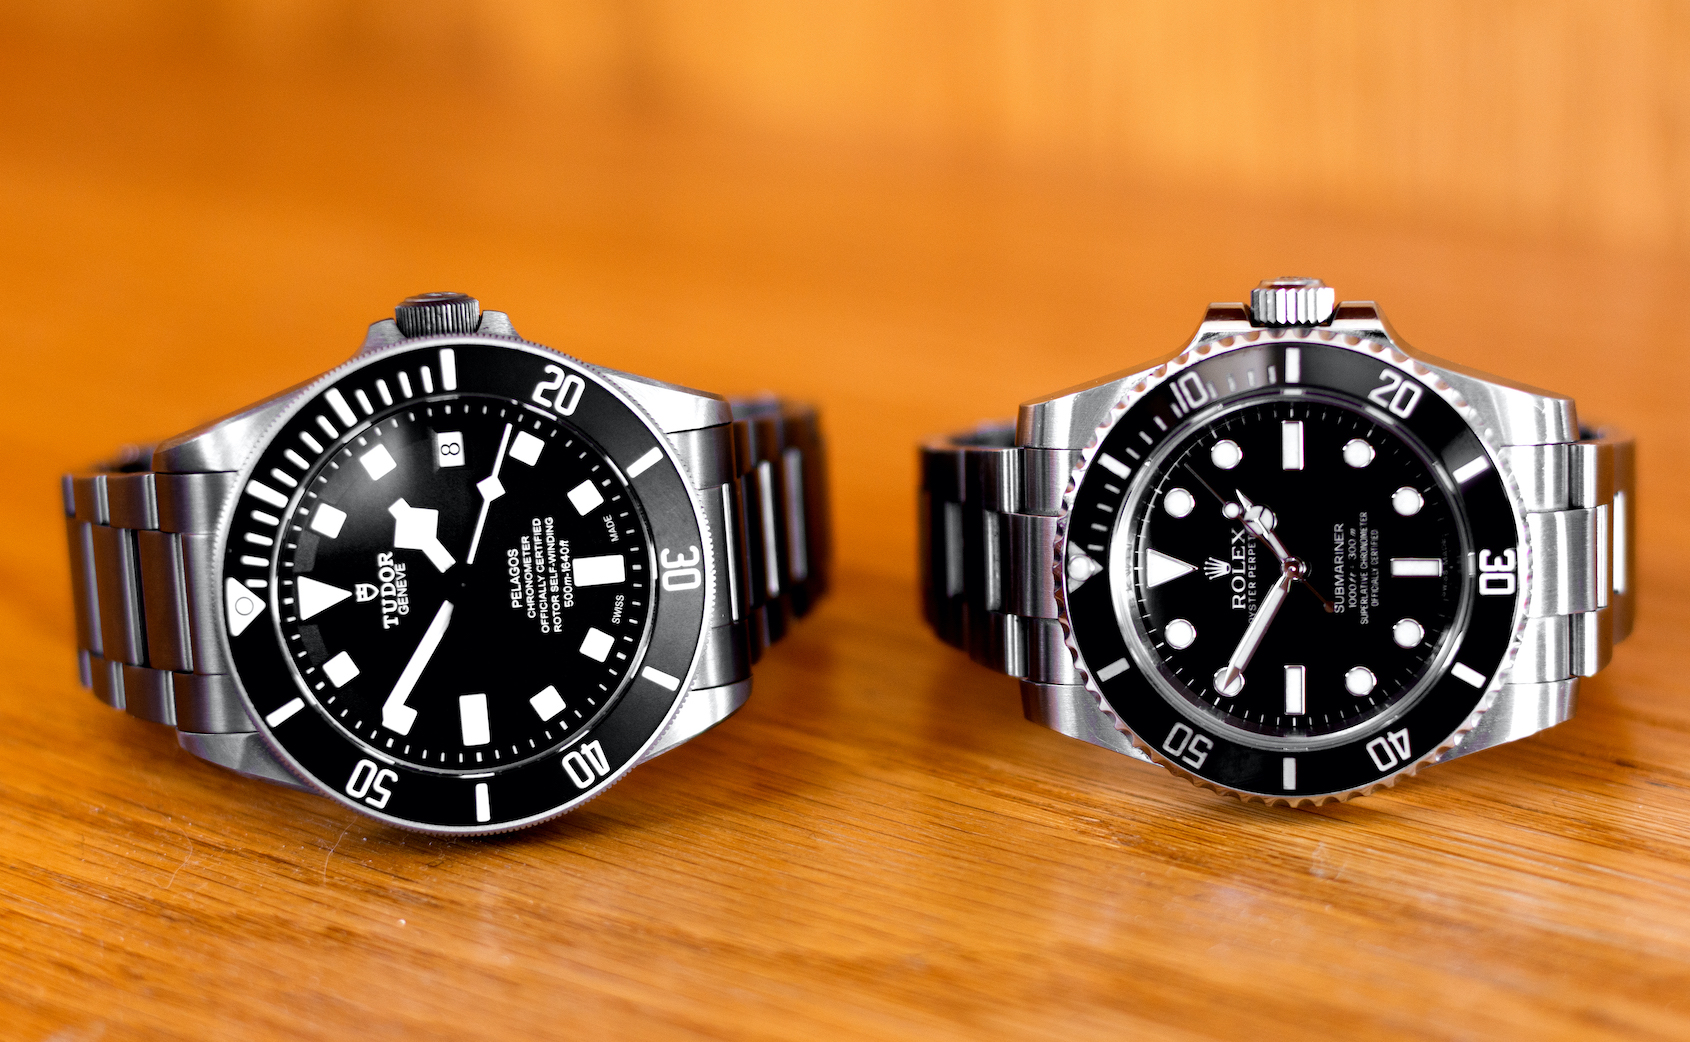 The Rolex Submariner vs the Tudor Pelagos, which is the better dive watch pound for pound? An enthusiast’s perspective